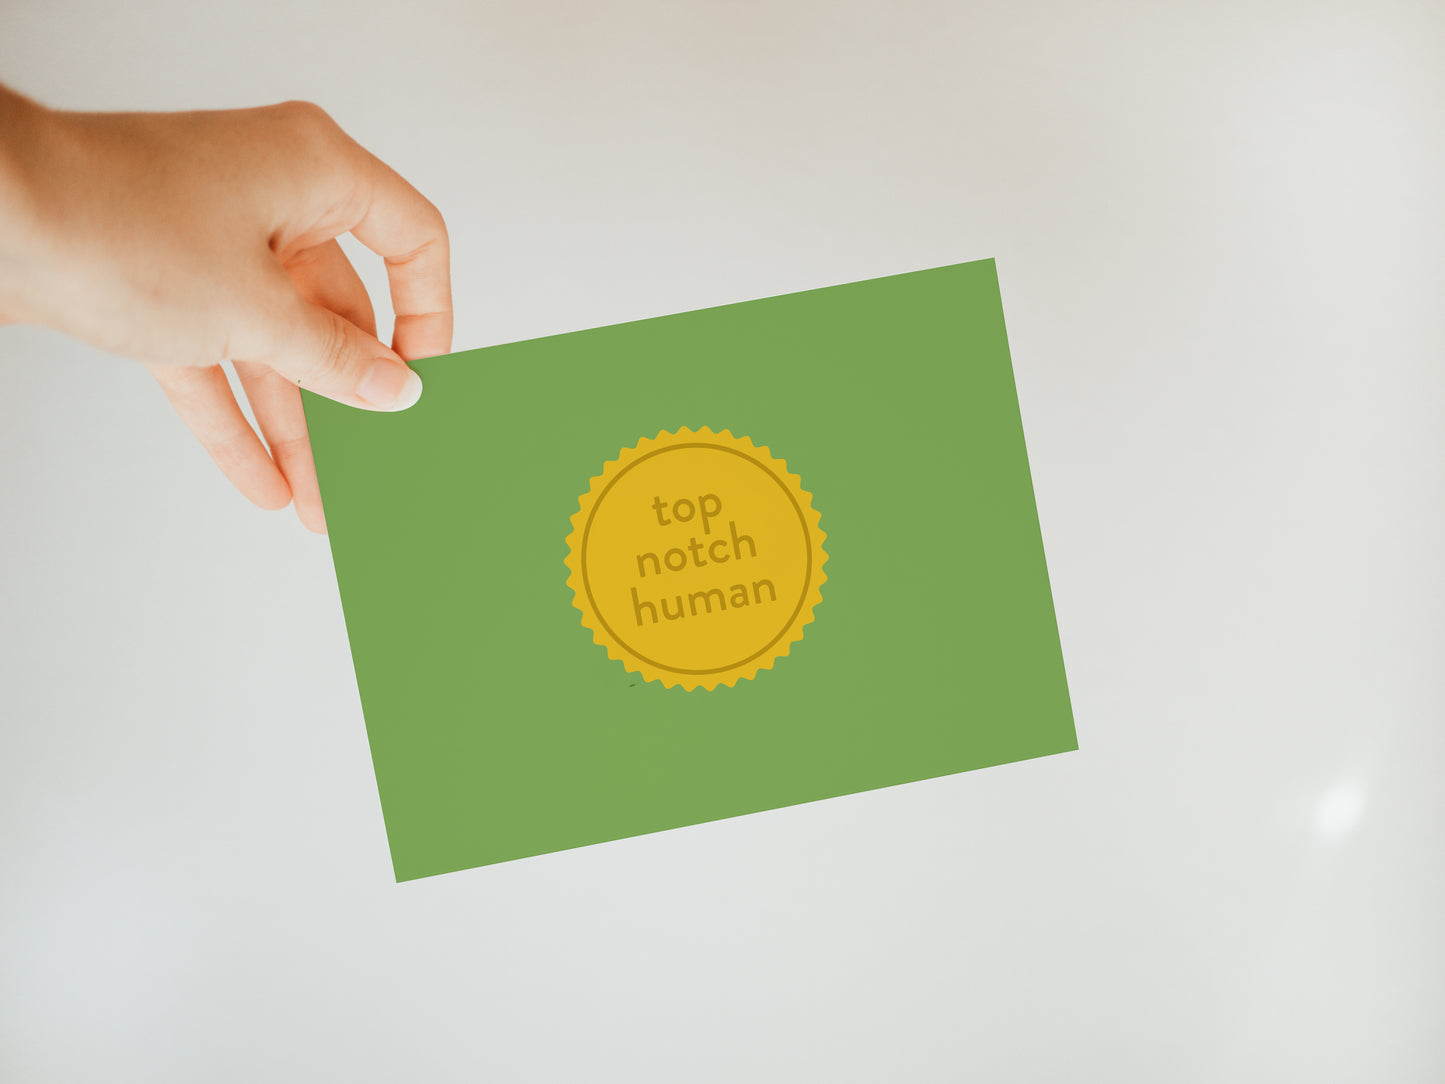 hand holding a green greeting card with a yellow design in the middle that looks like a medal and says "top notch human"